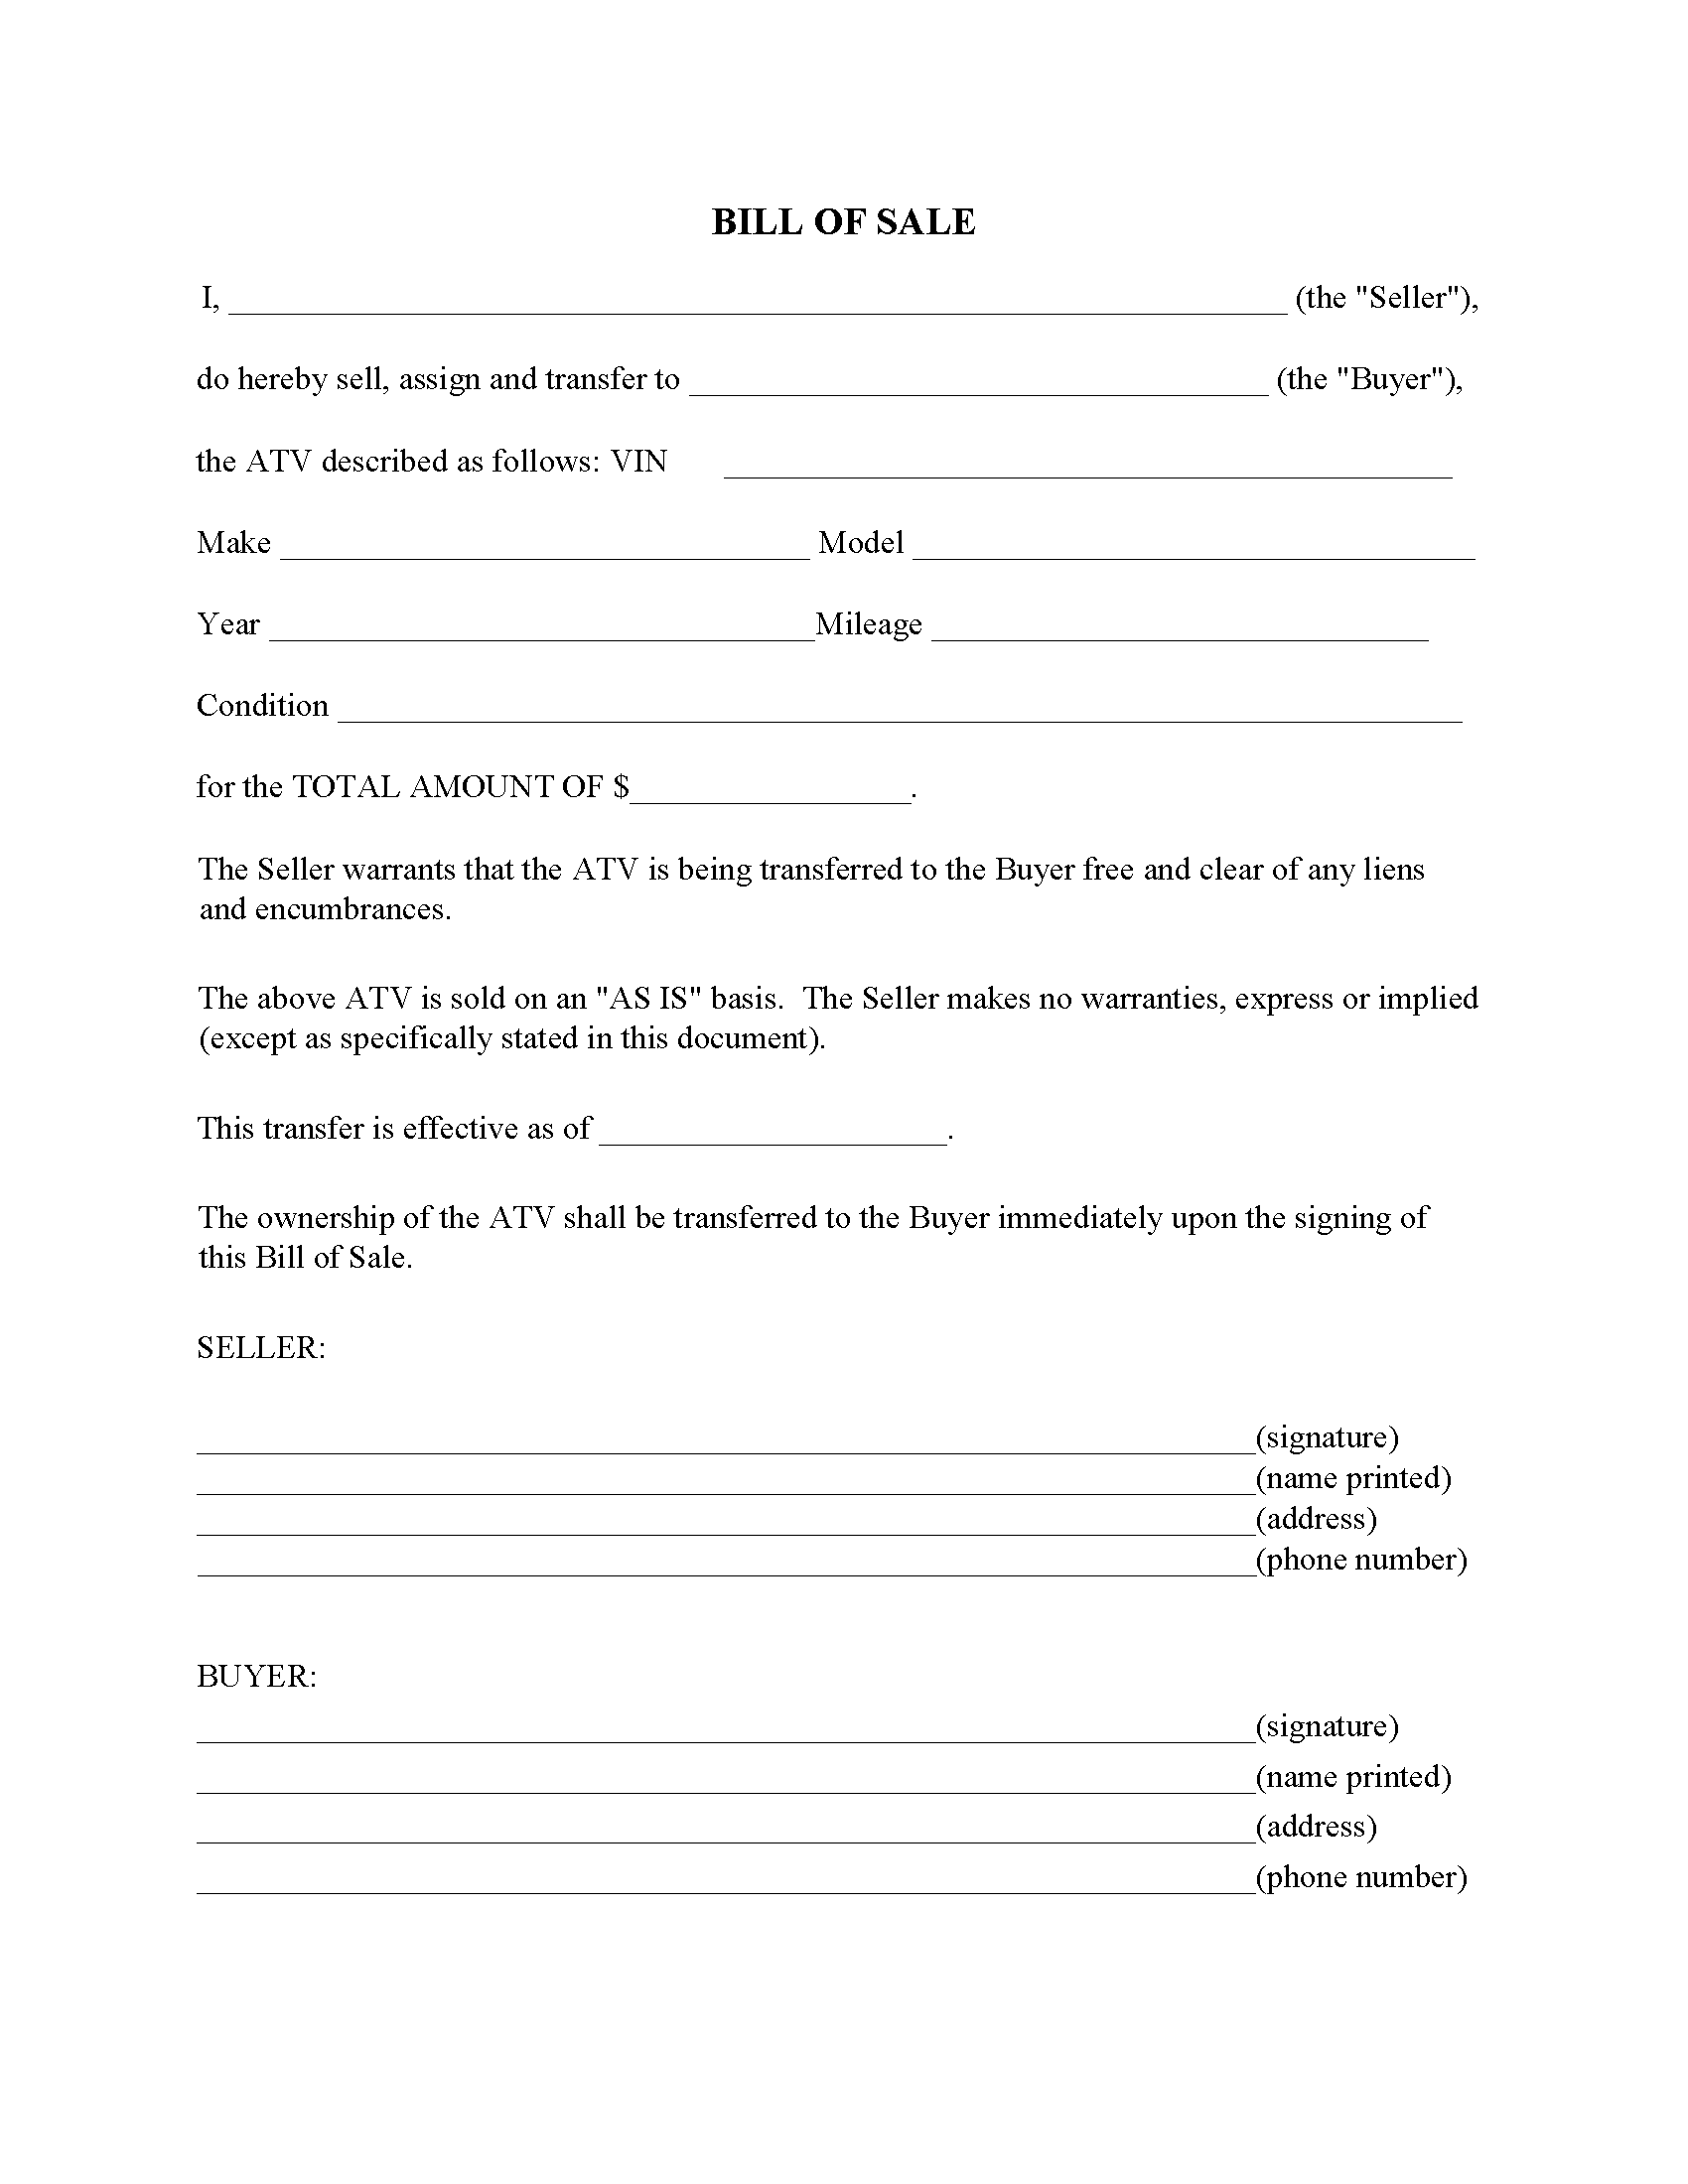 california-atv-bill-of-sale-form-free-printable-legal-forms